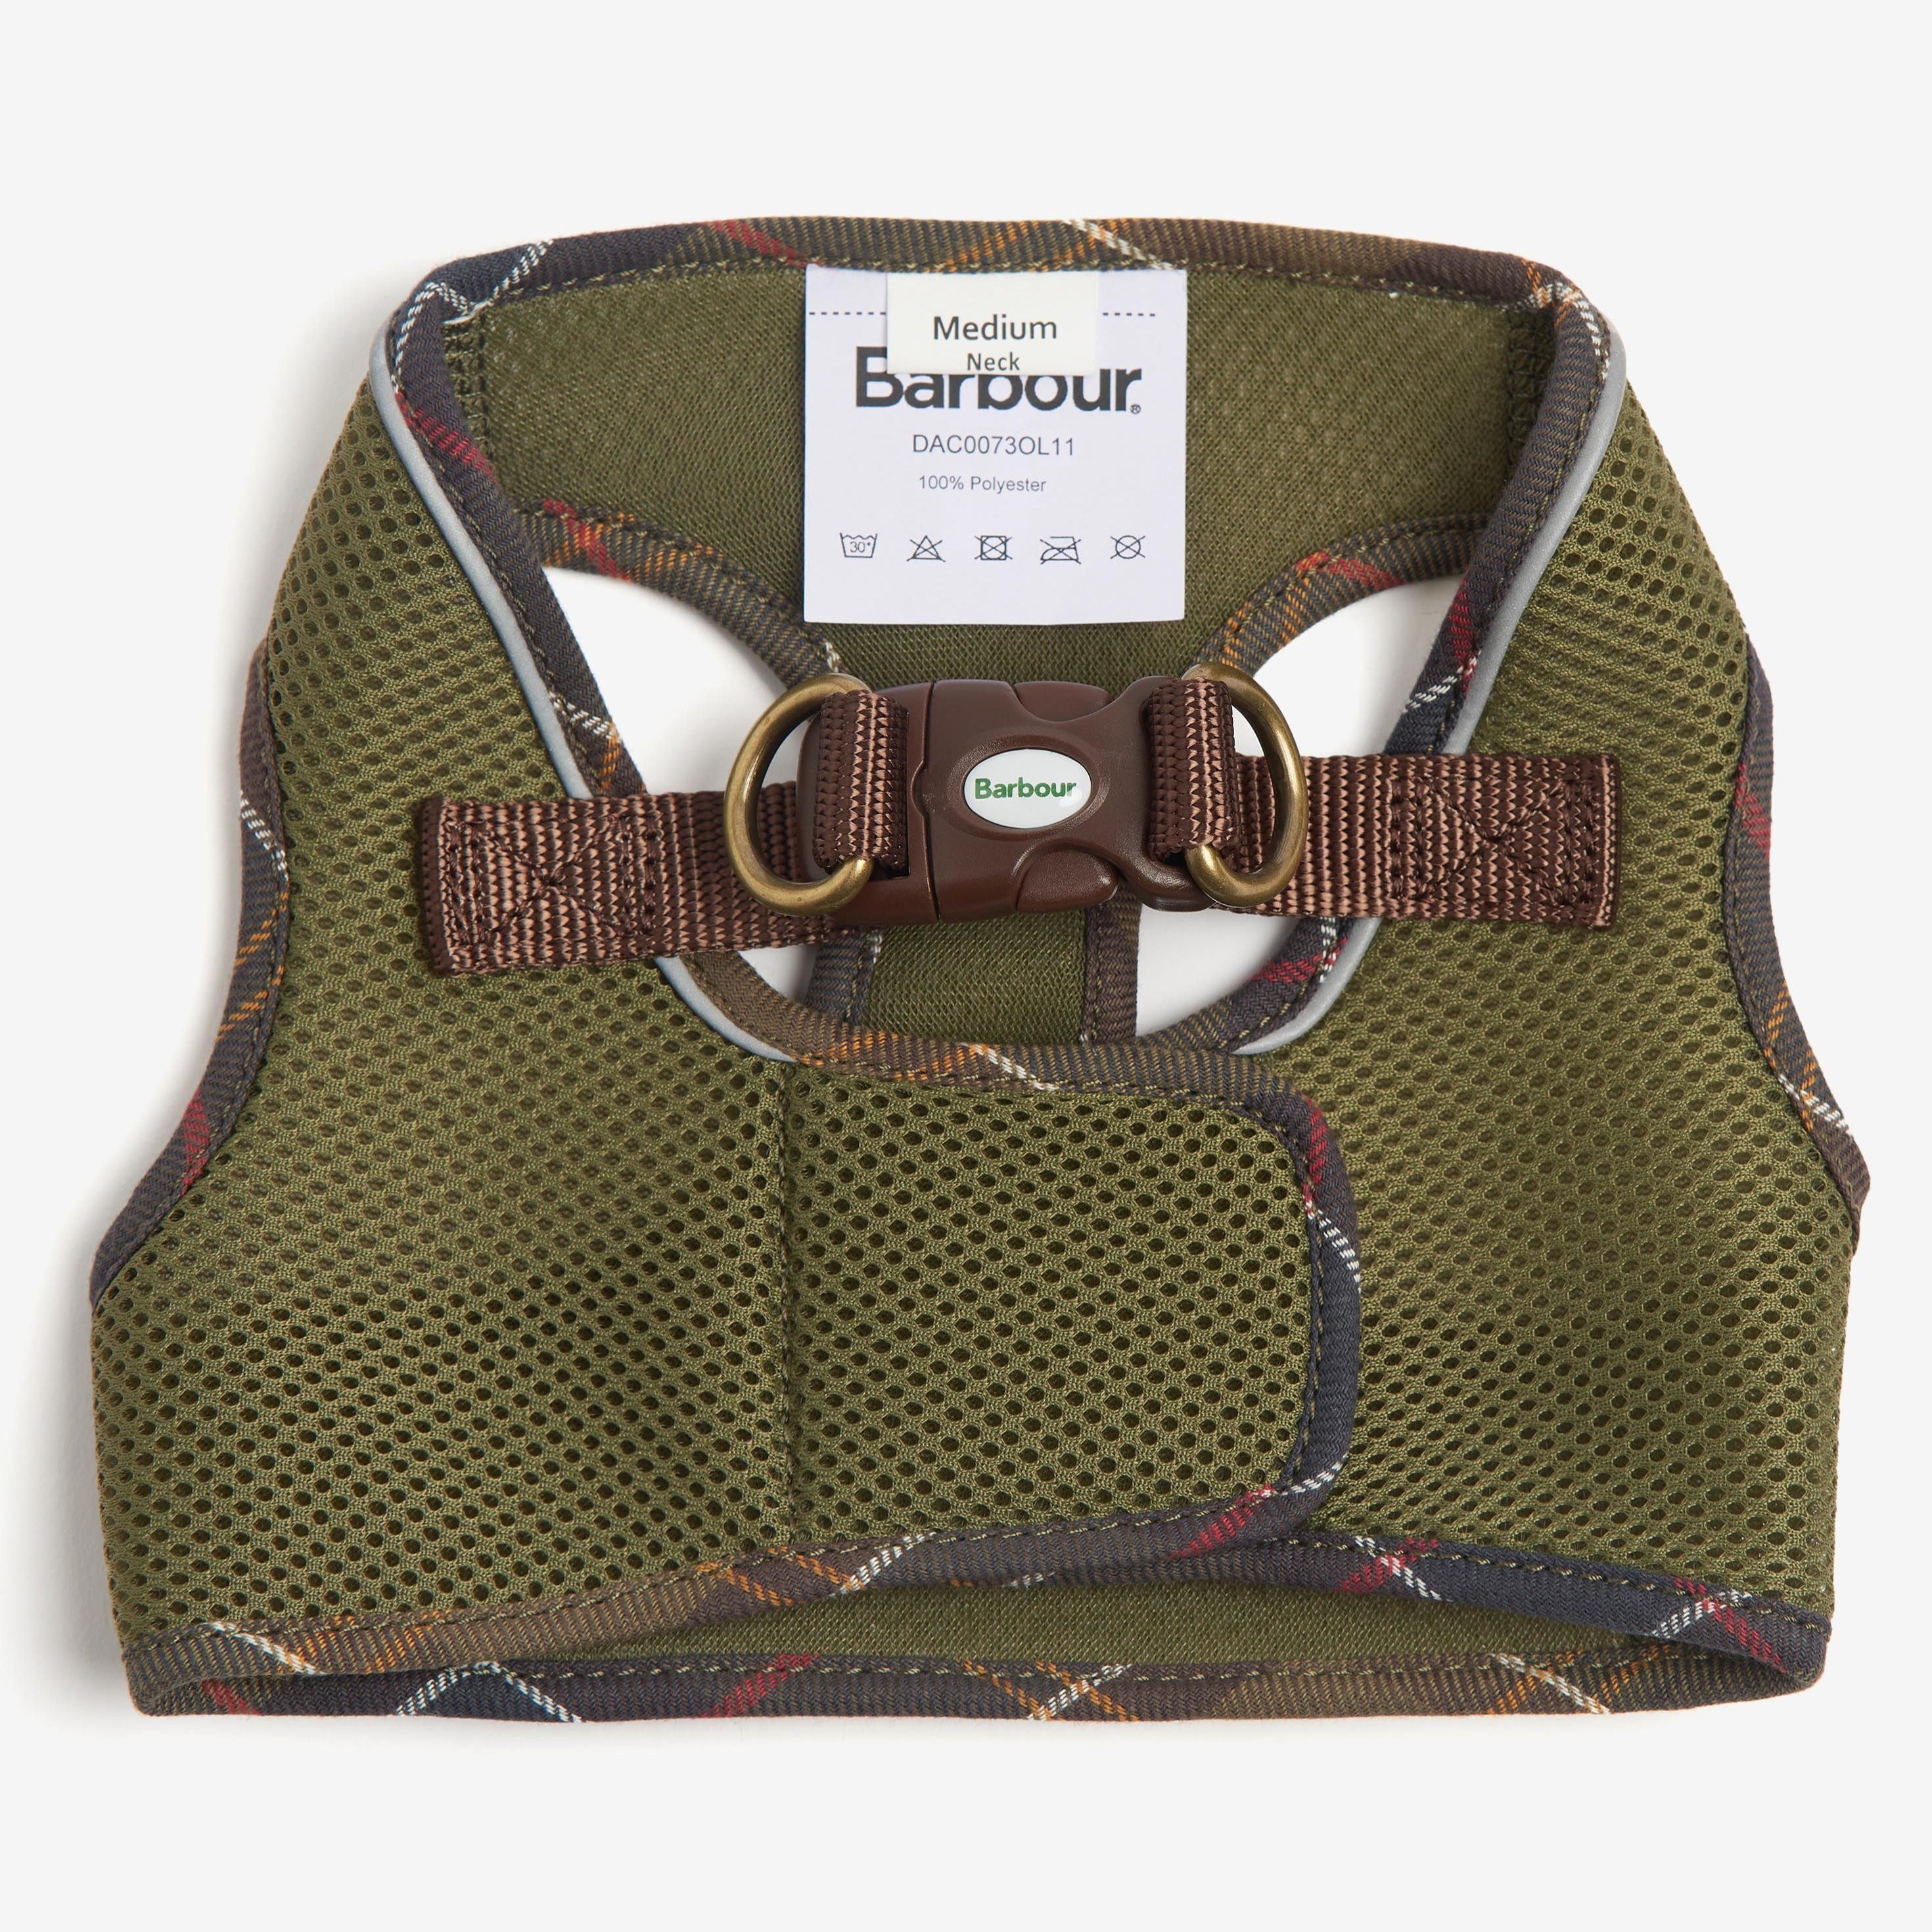 barbour airmesh dog harness for training Labradors Durable, perfect fit leather dog harness designed for English Bulldogs, Cocker Spaniels, for active Border Collies,Terrier dog harness ensuring perfect control and fit, Colorful perfect fit dog harnesses for Jack Russell Terrier, French Bulldogs, for German Shepherds. Easy to use, step-in perfect fit dog harness for Boxer dogs. Premium perfect fit dog harness designed for the comfort of Golden Retrievers